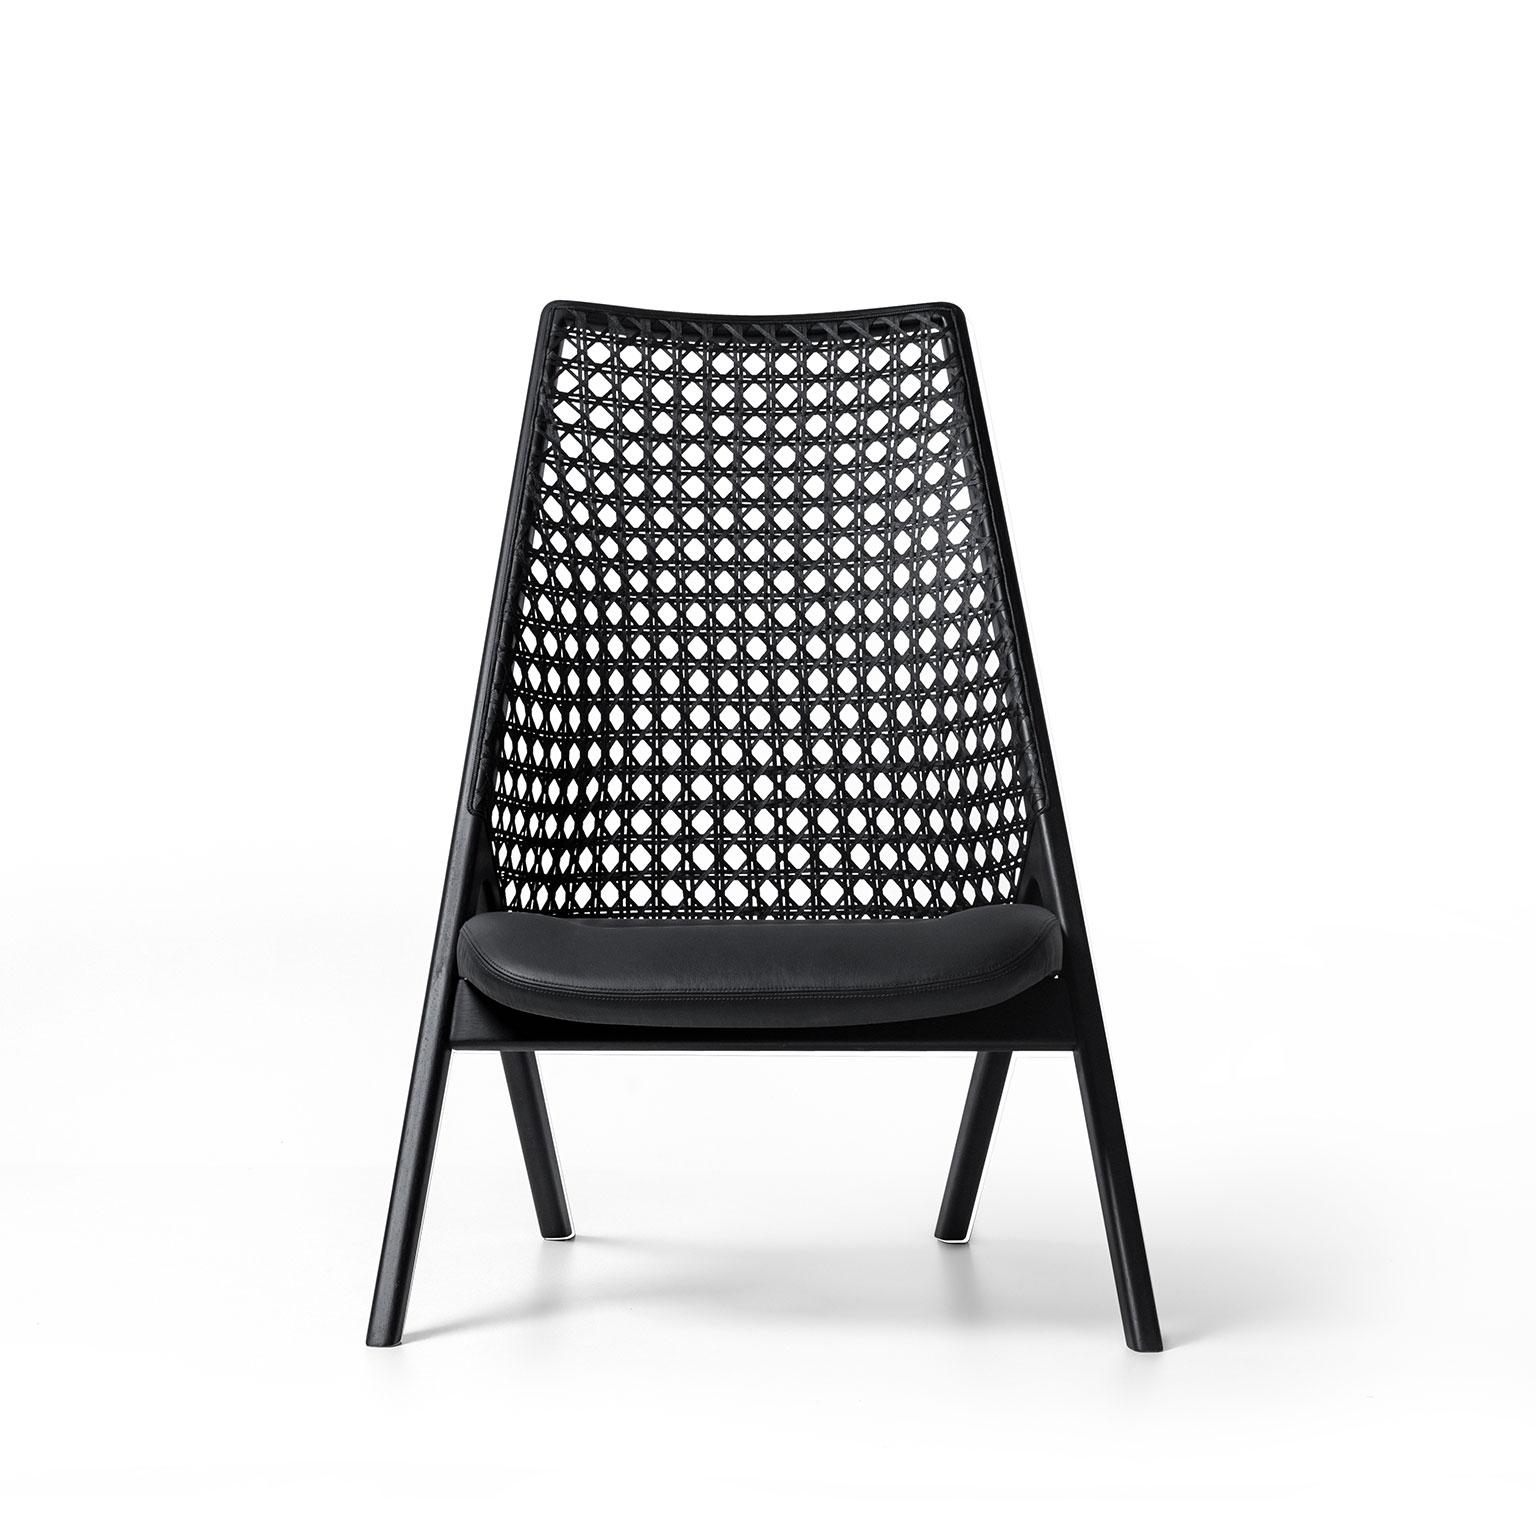 Tela lounge chair is a fusion of contemporary design and traditional Brazilian materials. The backrest weave is inspired by the classic cane woven pattern of the midcentury furniture. It was recreated in a larger scale and made with cotton thread